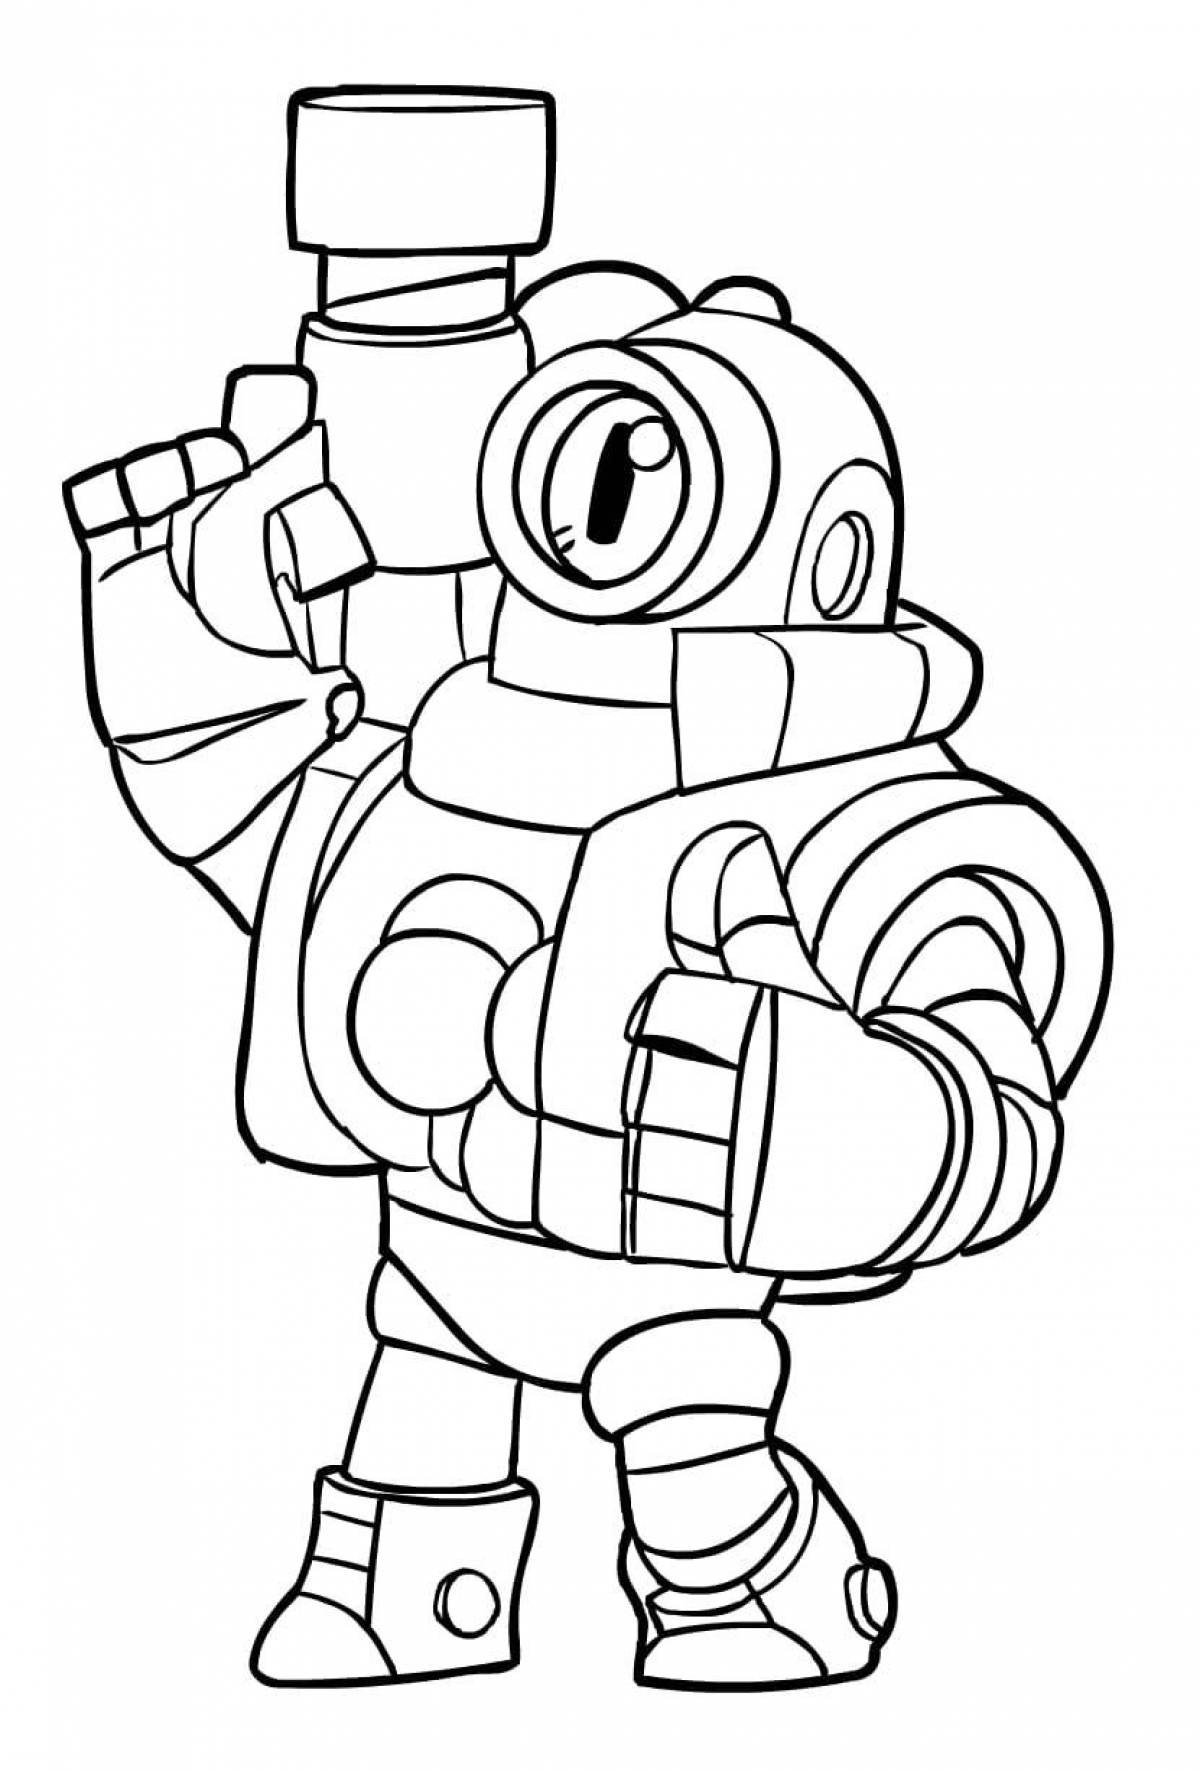 Outstanding bravo stars coloring pages for boys